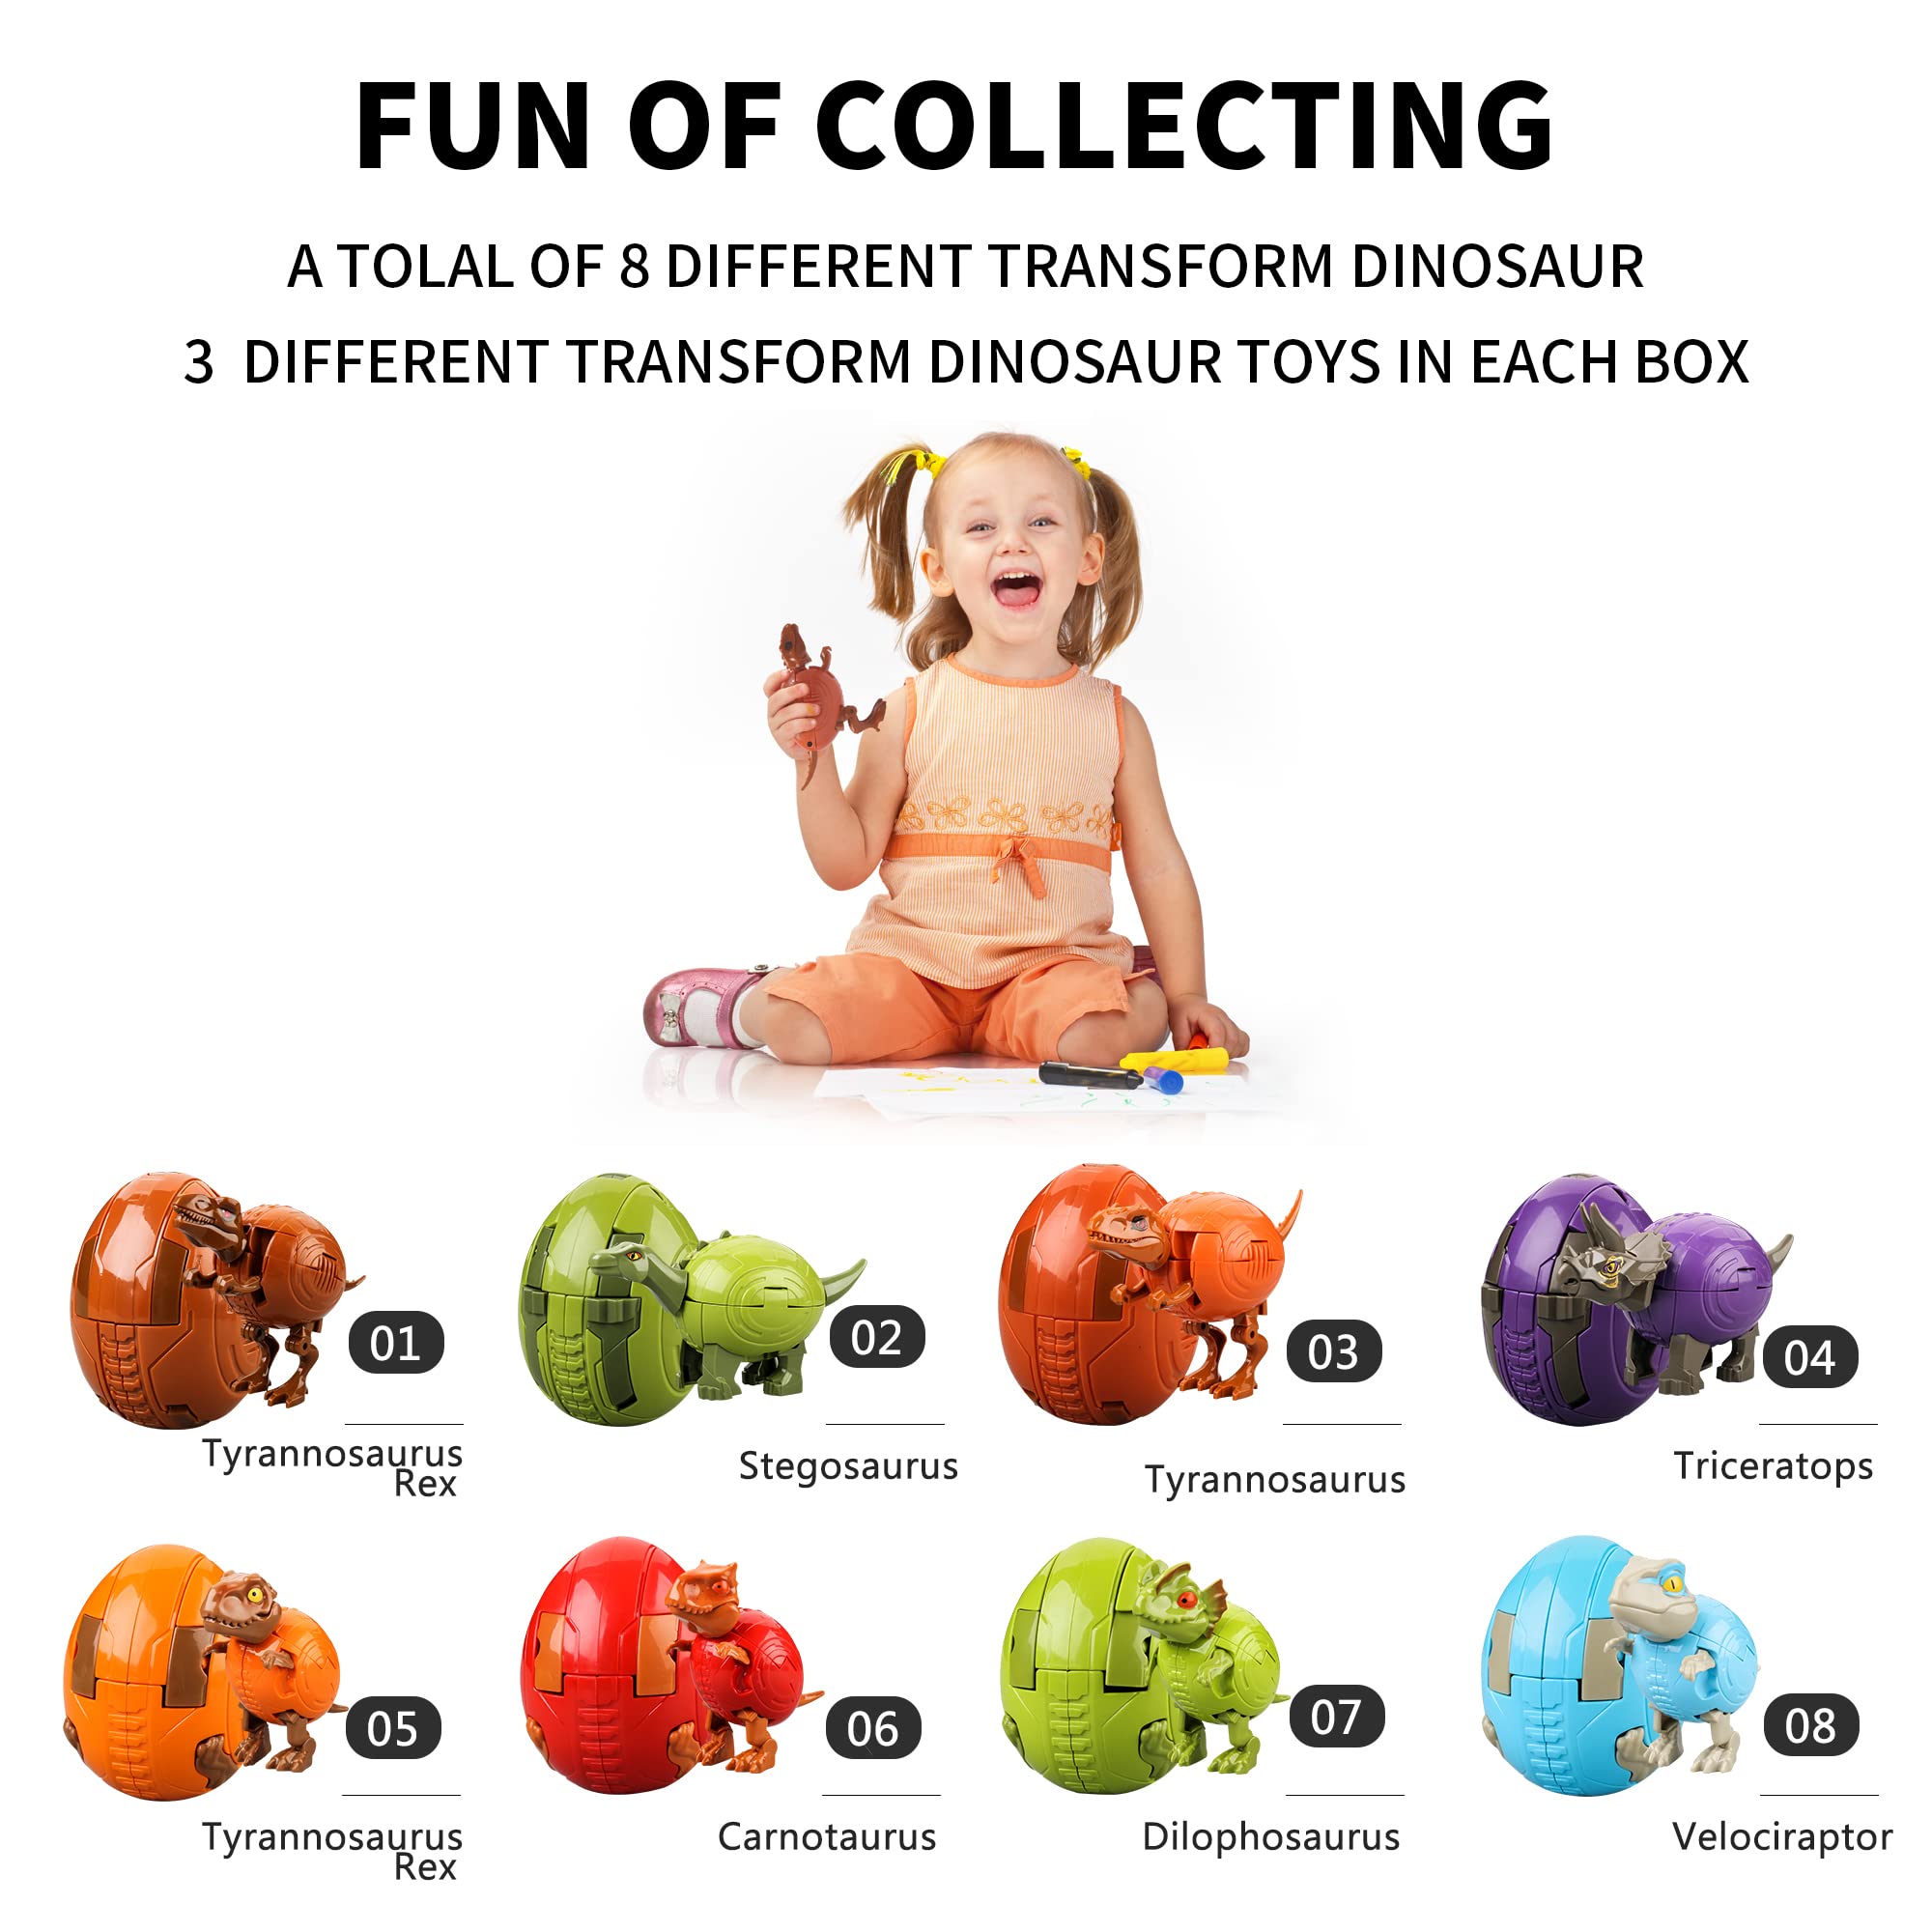 YULONG Lab Bath Bombs for Kids with Toys Inside Surprise, Dino Egg Bath Bomb Kit with Dinosaur Toy Organic and Natural Bath Fizz Spa Bath Set Gift, for Birthday Easter Christmas Boys and Girls Gifts